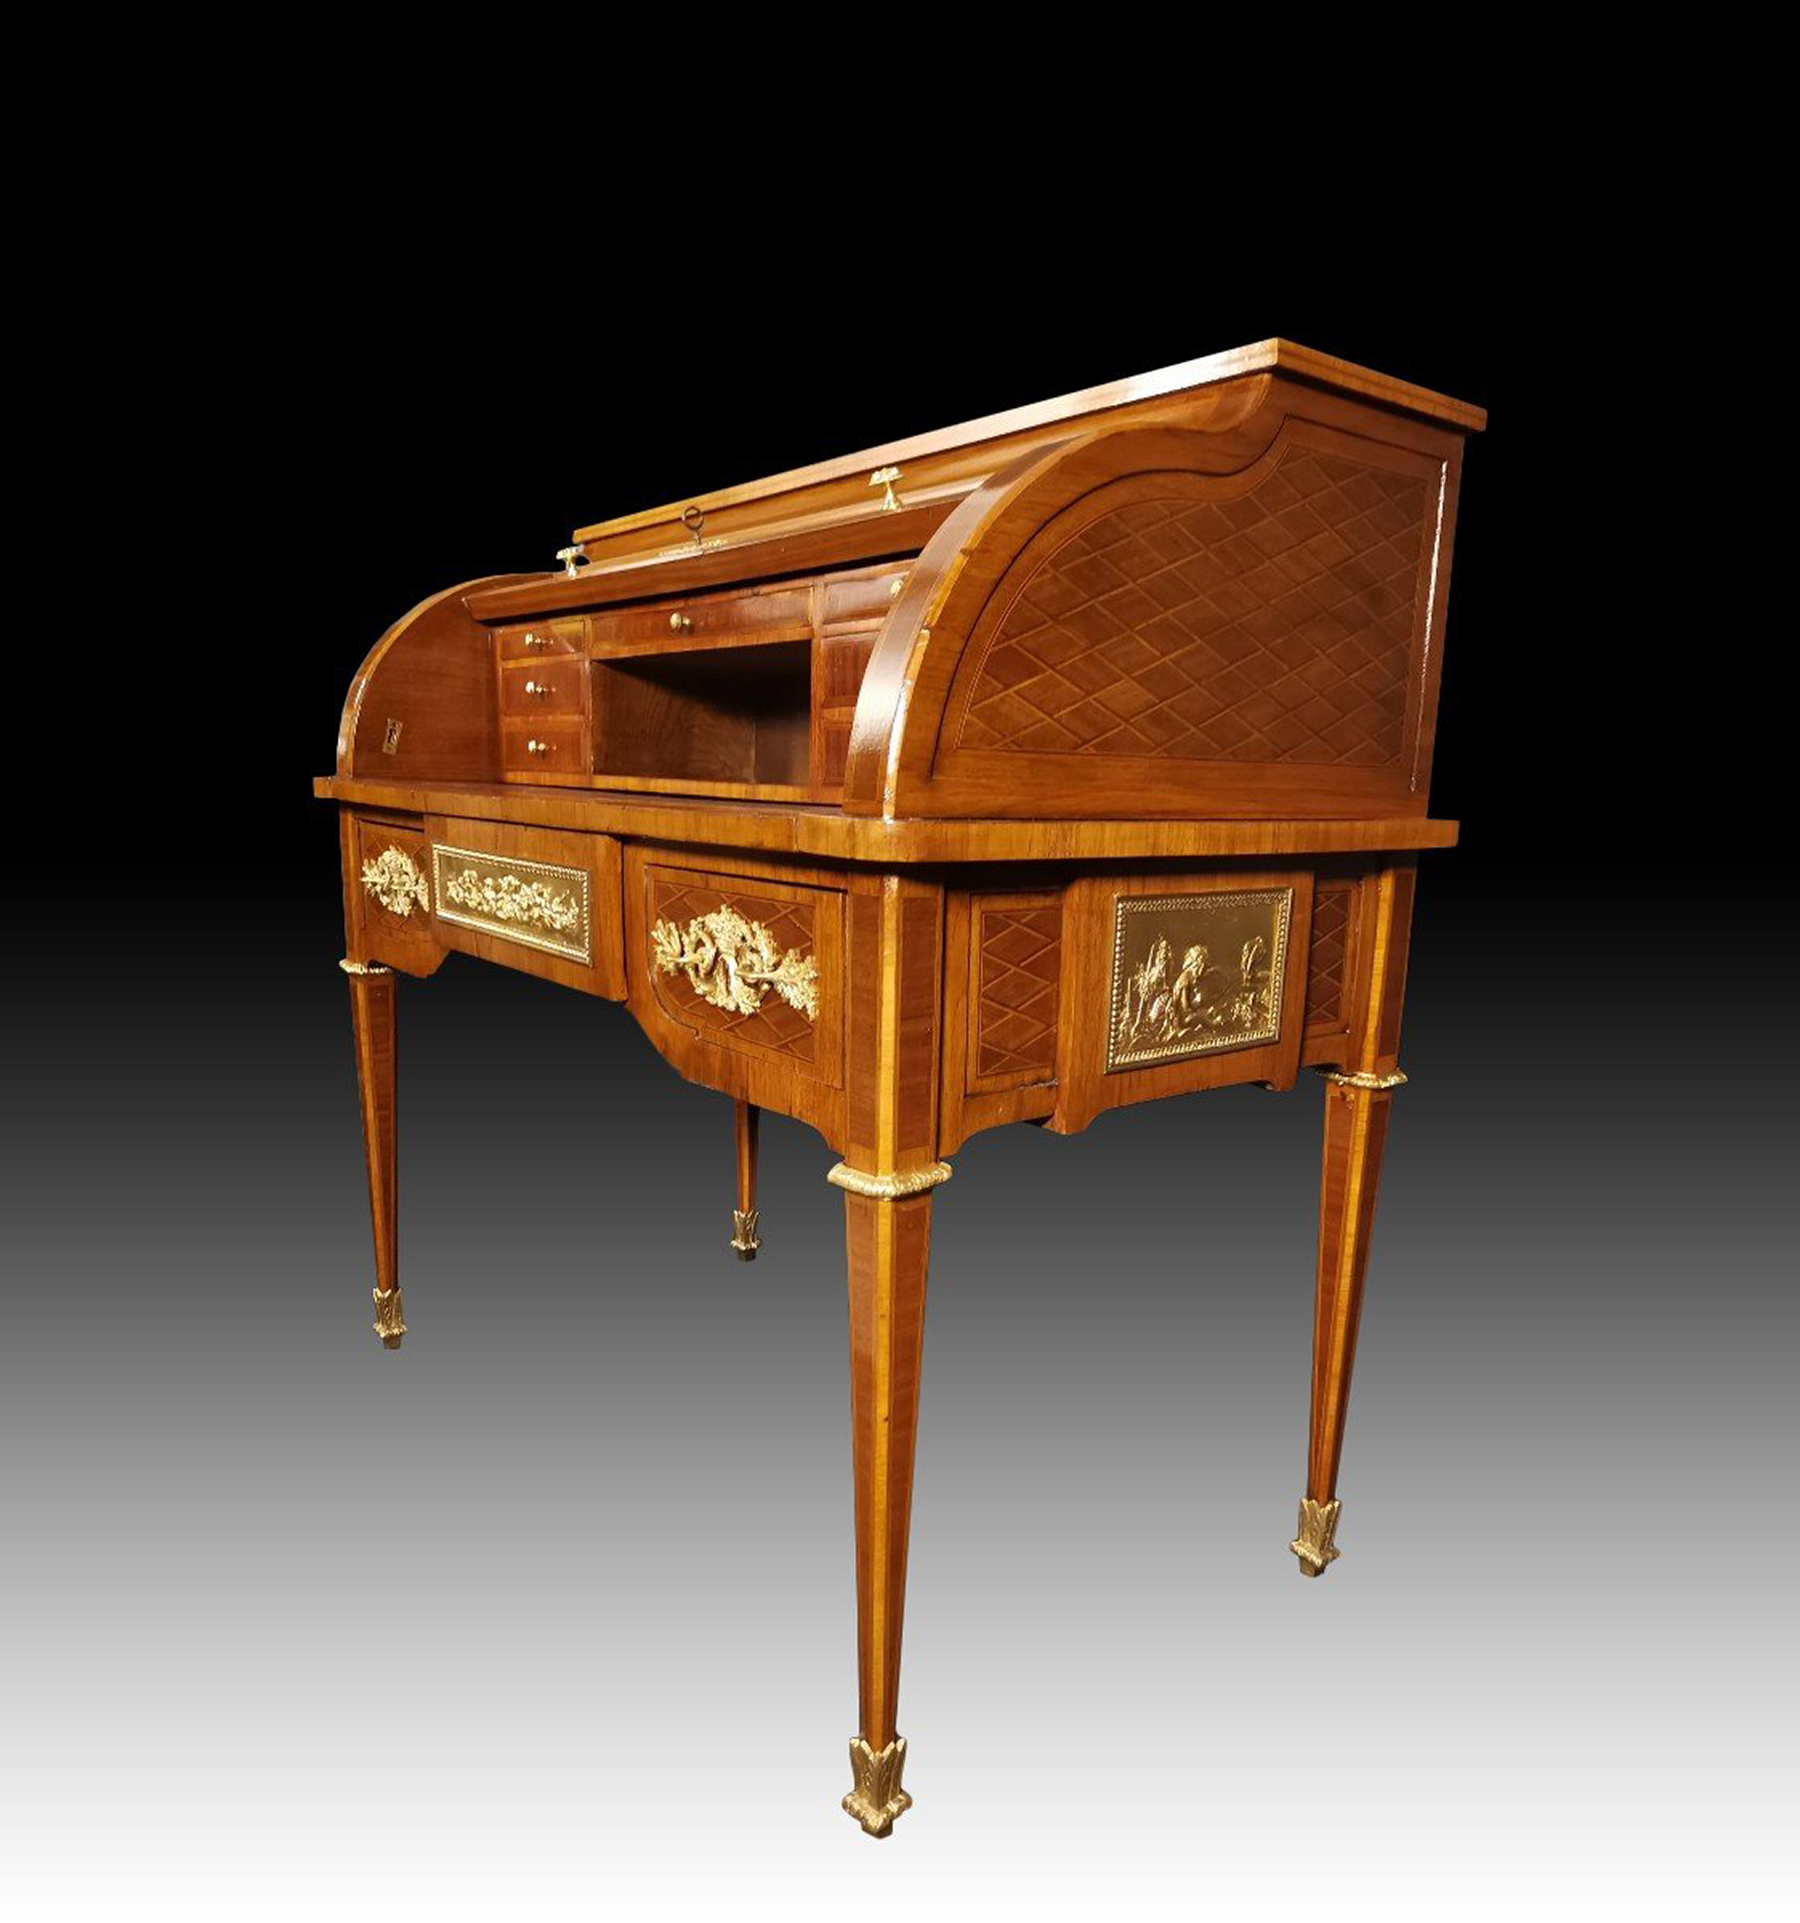 19th century cylindrical desk in Louis XVI style marquetry, 19th century - Image 4 of 7